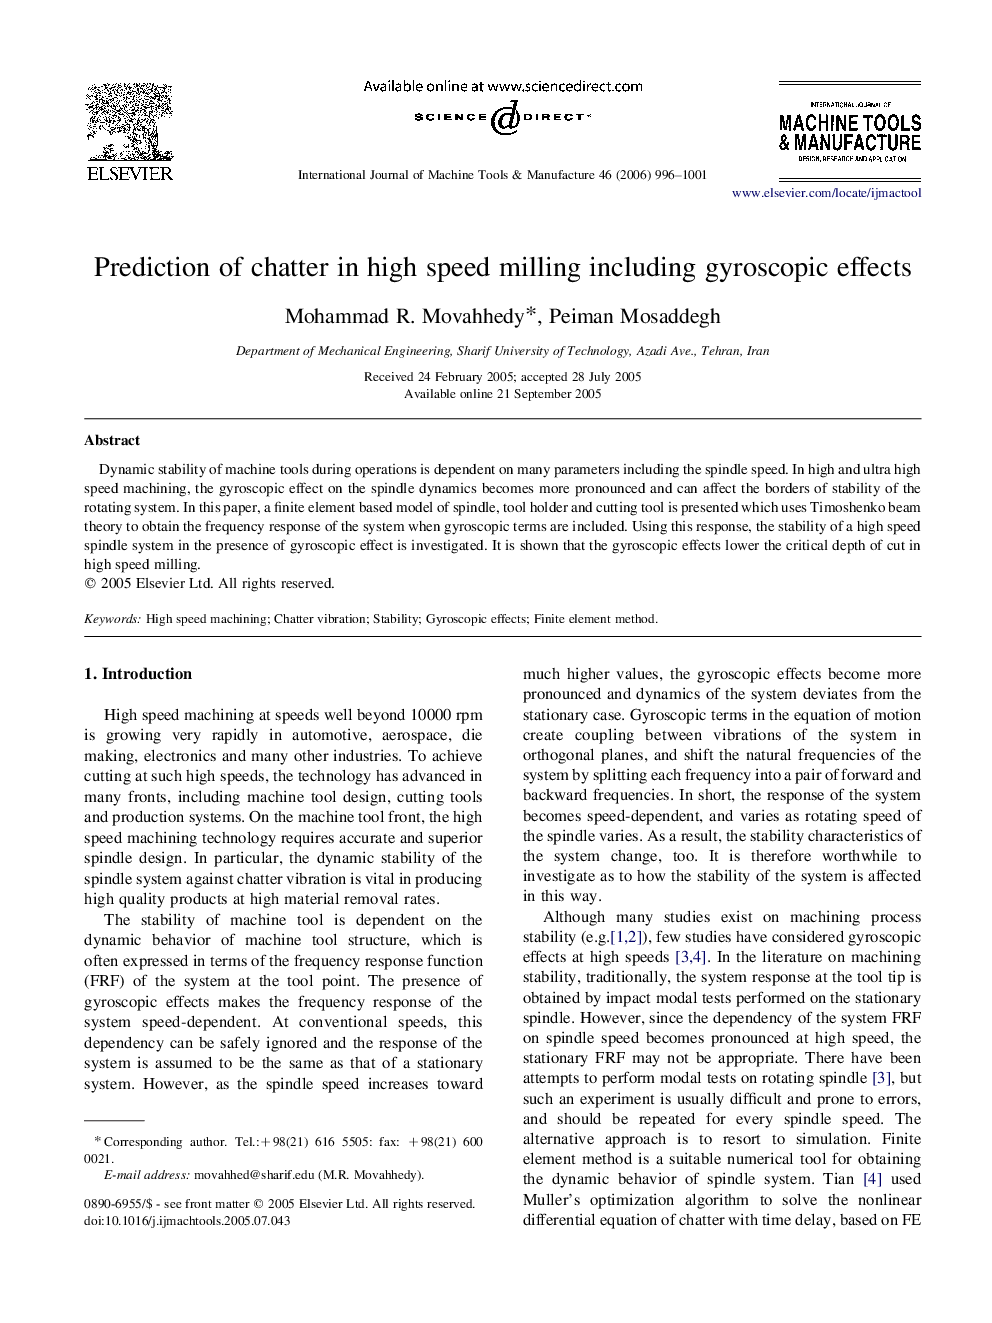 Prediction of chatter in high speed milling including gyroscopic effects